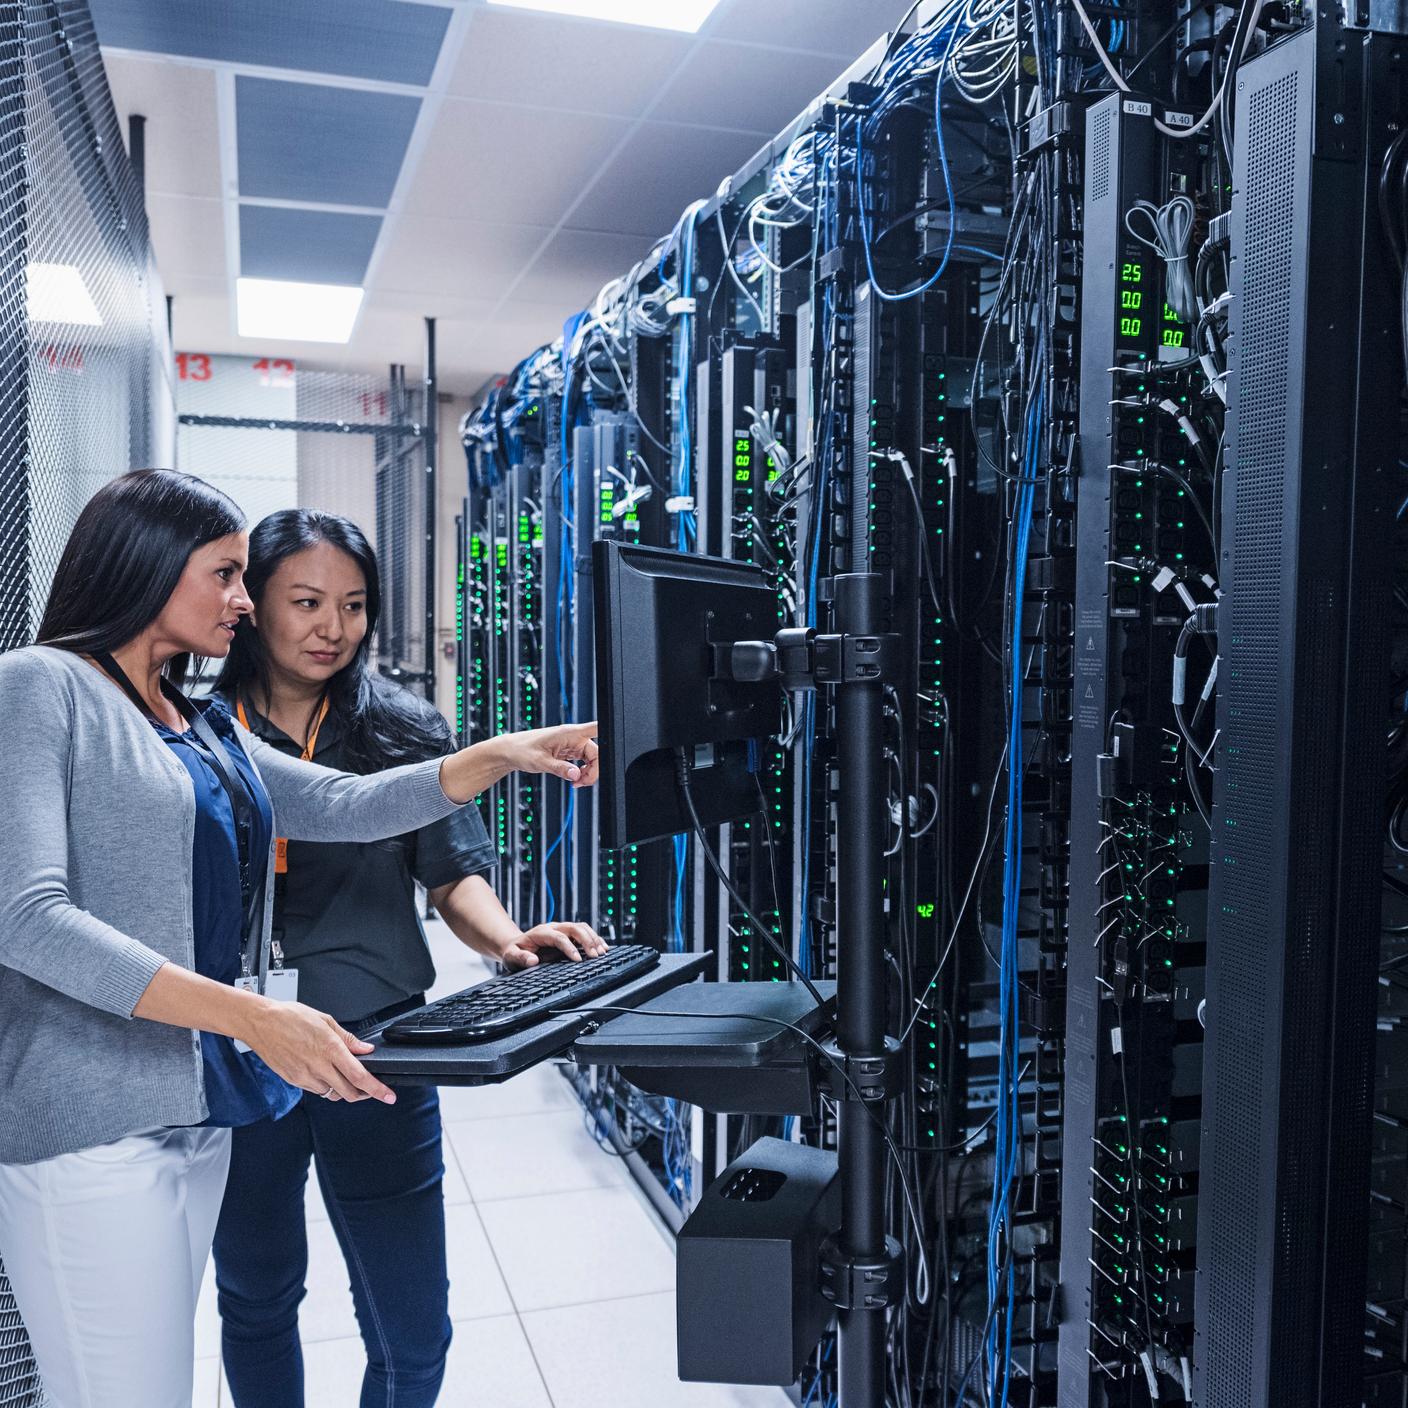 Telesoft Technologies made standards key to strategy - Two women working with computer in server room